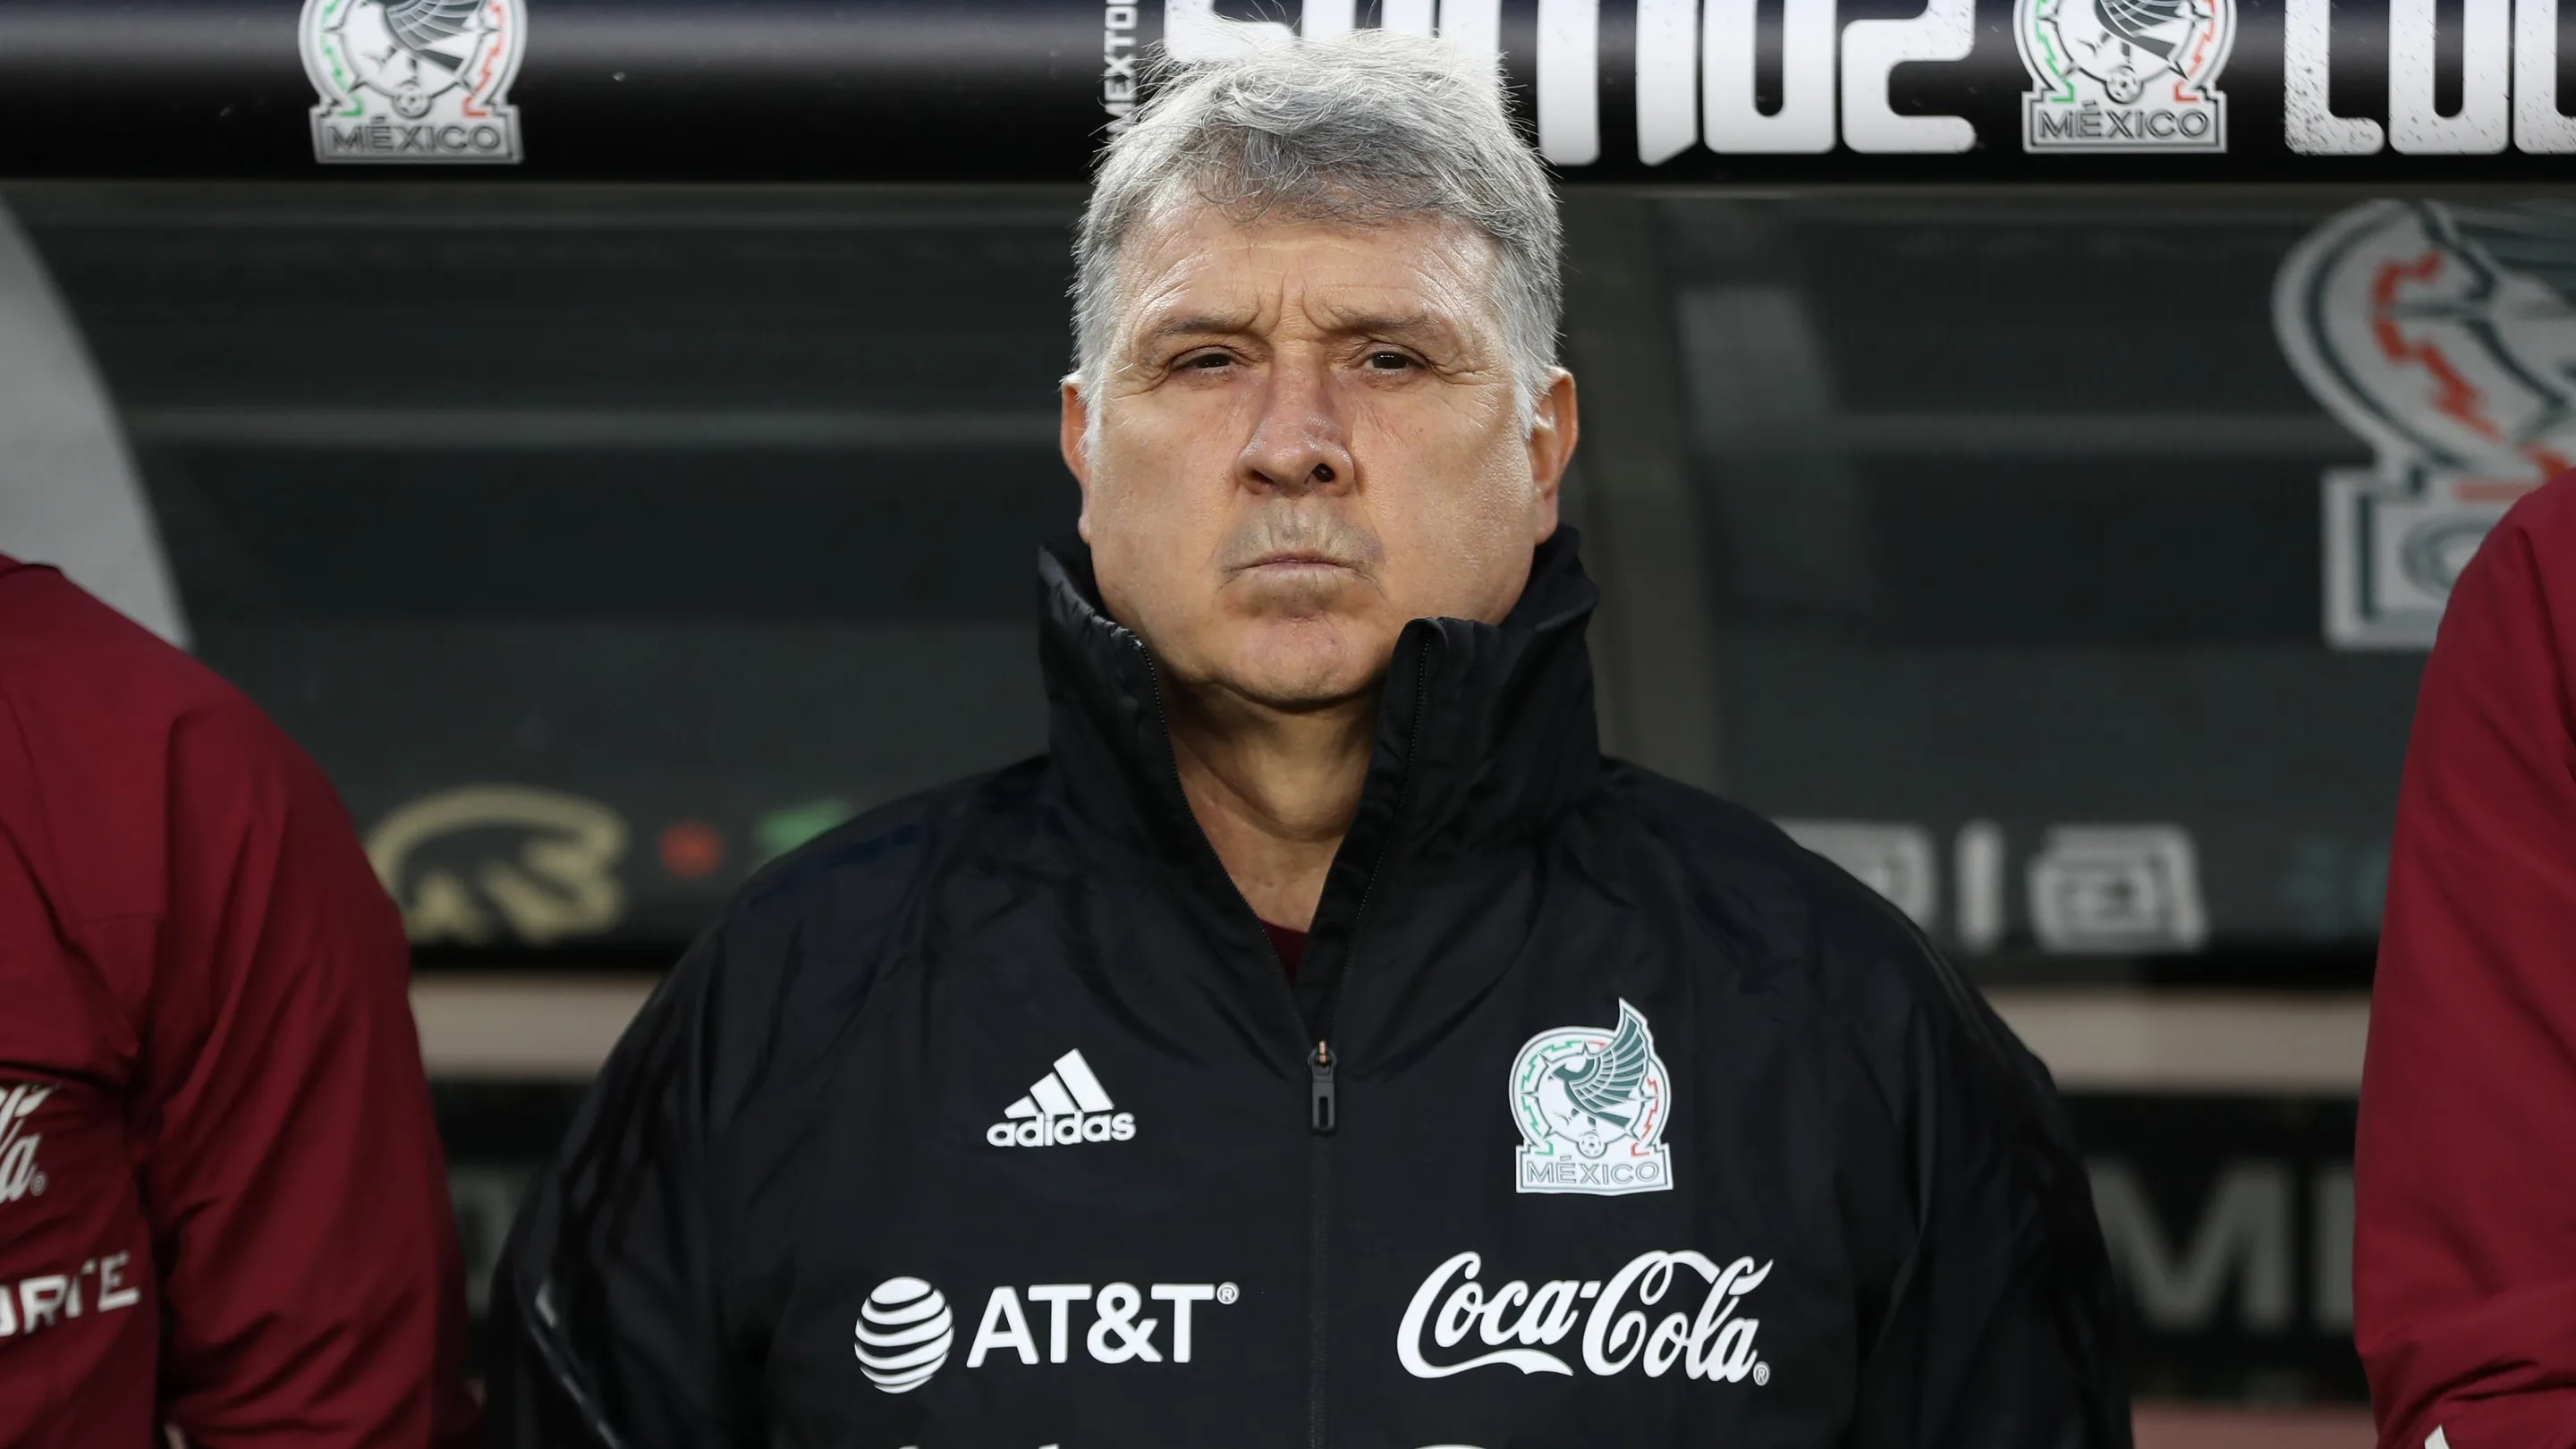 Highest-Paid Managers At World Cup 2022, Gerardo Martino - Mexico